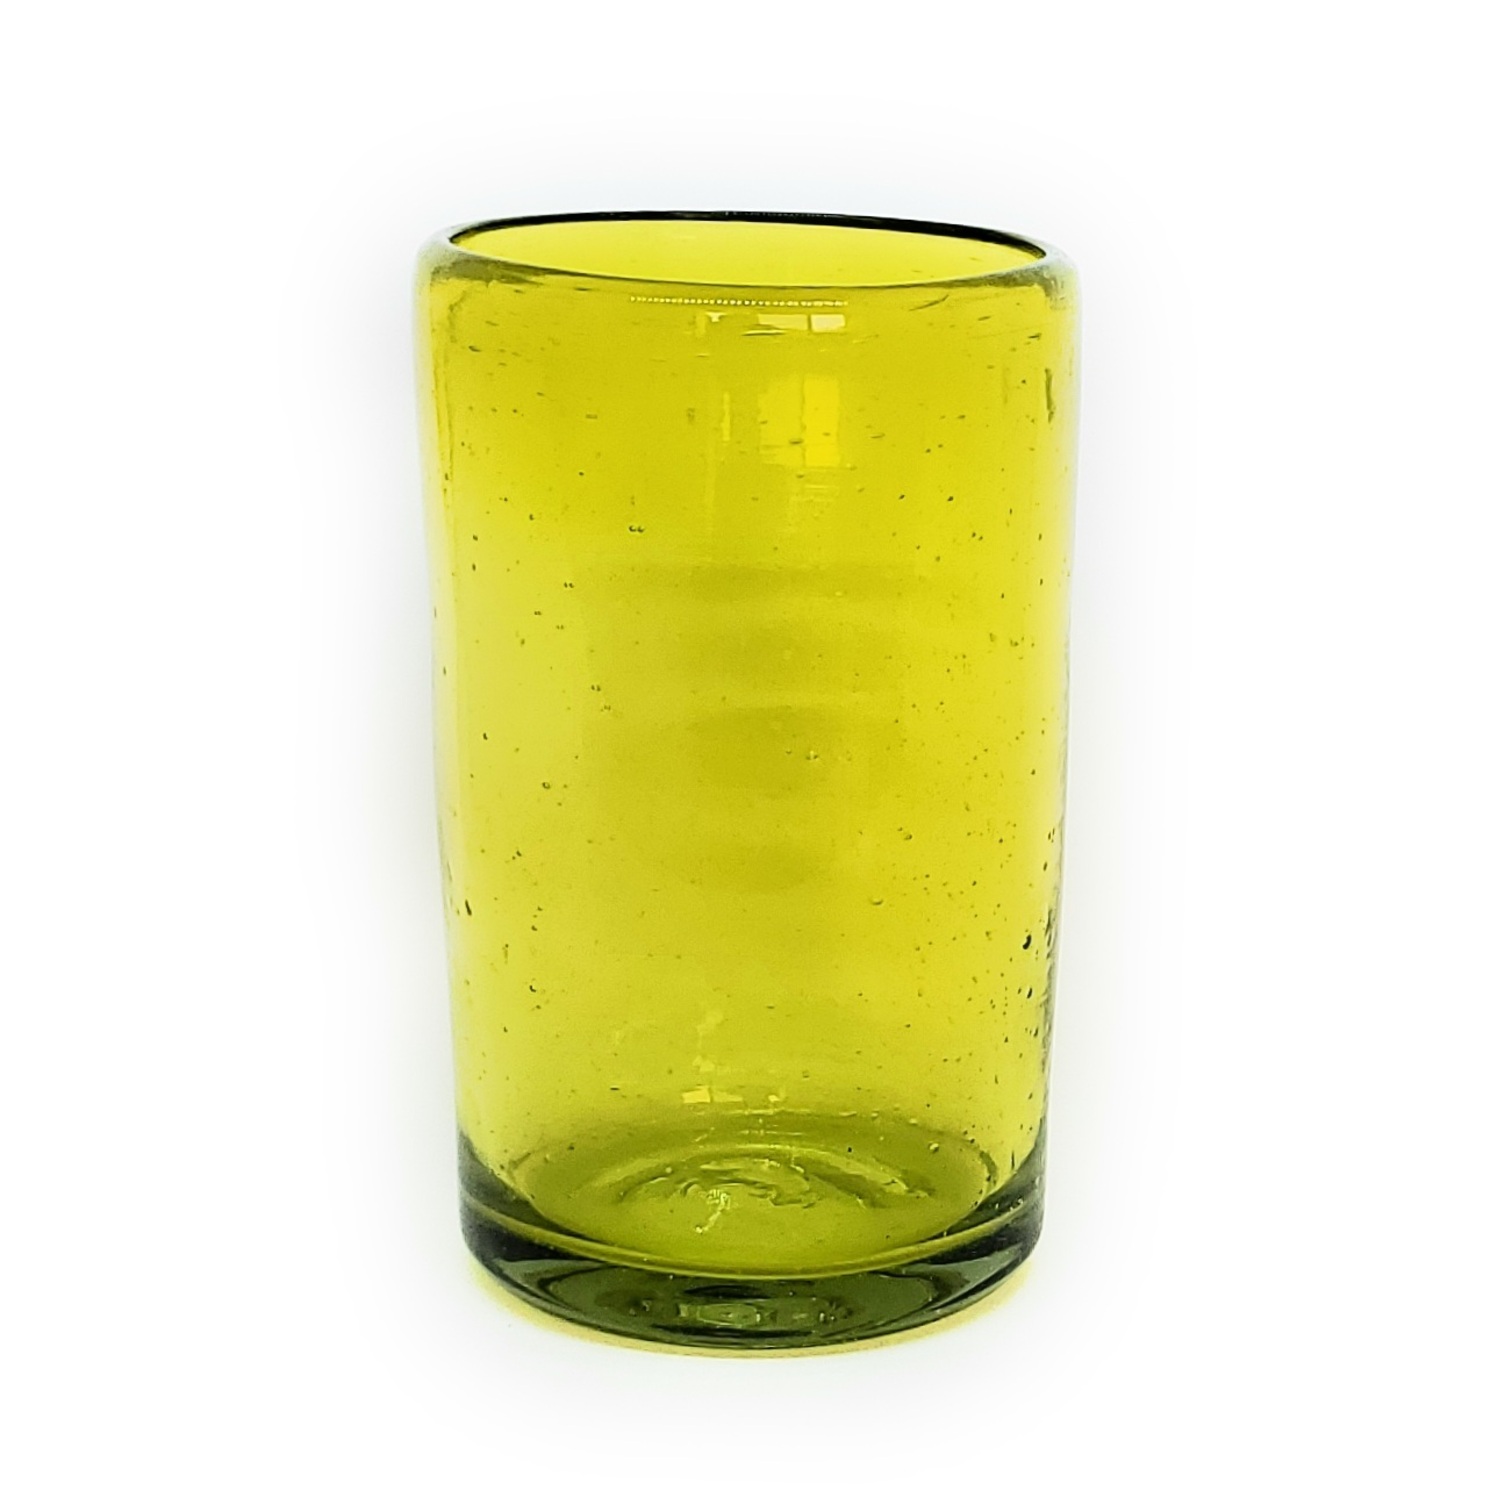 Solid Yellow 14 oz Drinking Glasses (set of 6)